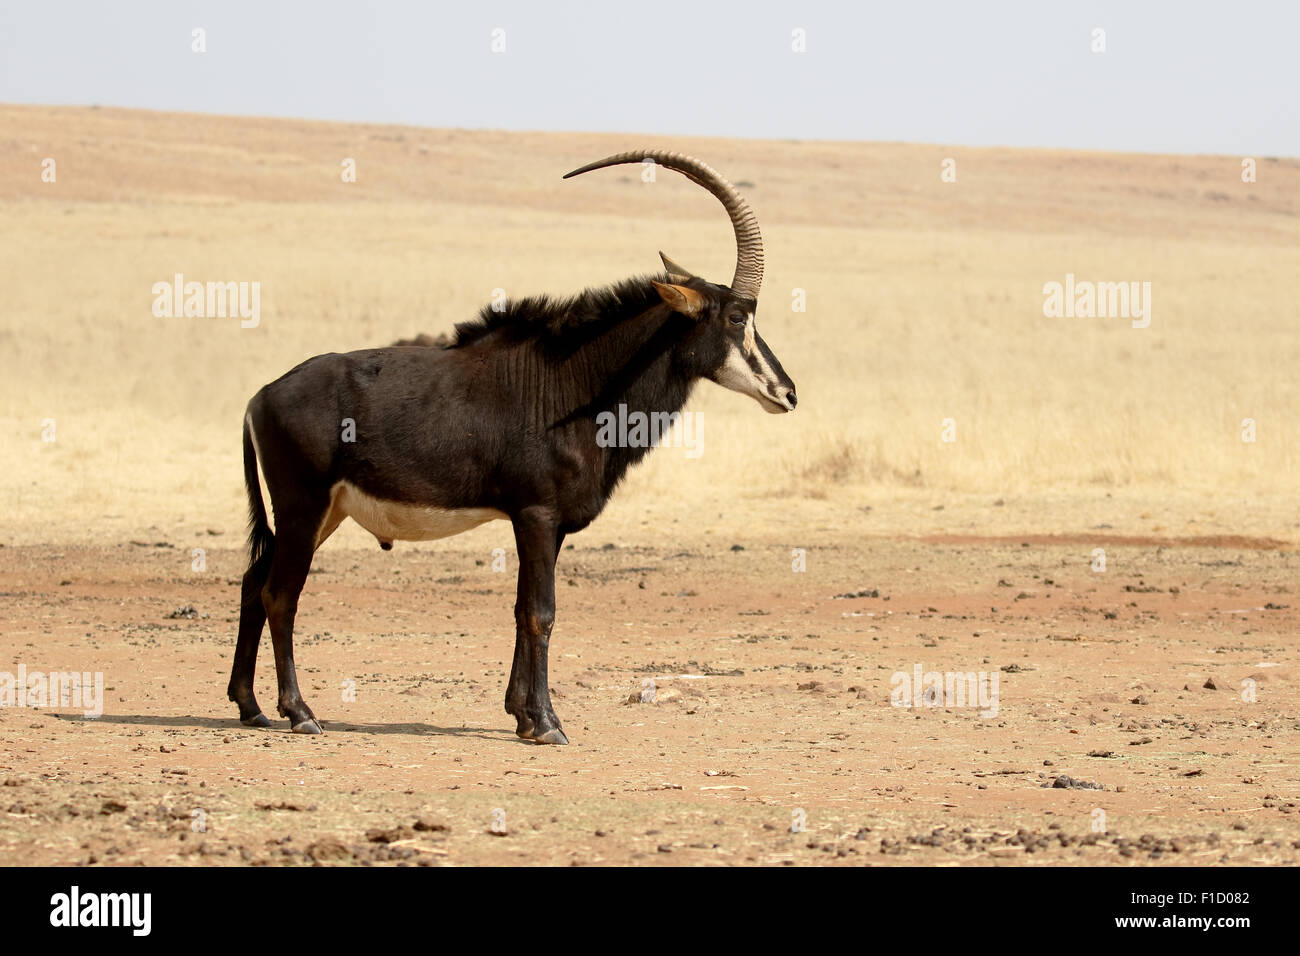 Sable, Hippotragus niger, single mammal, South Africa, August 2015 Stock Photo